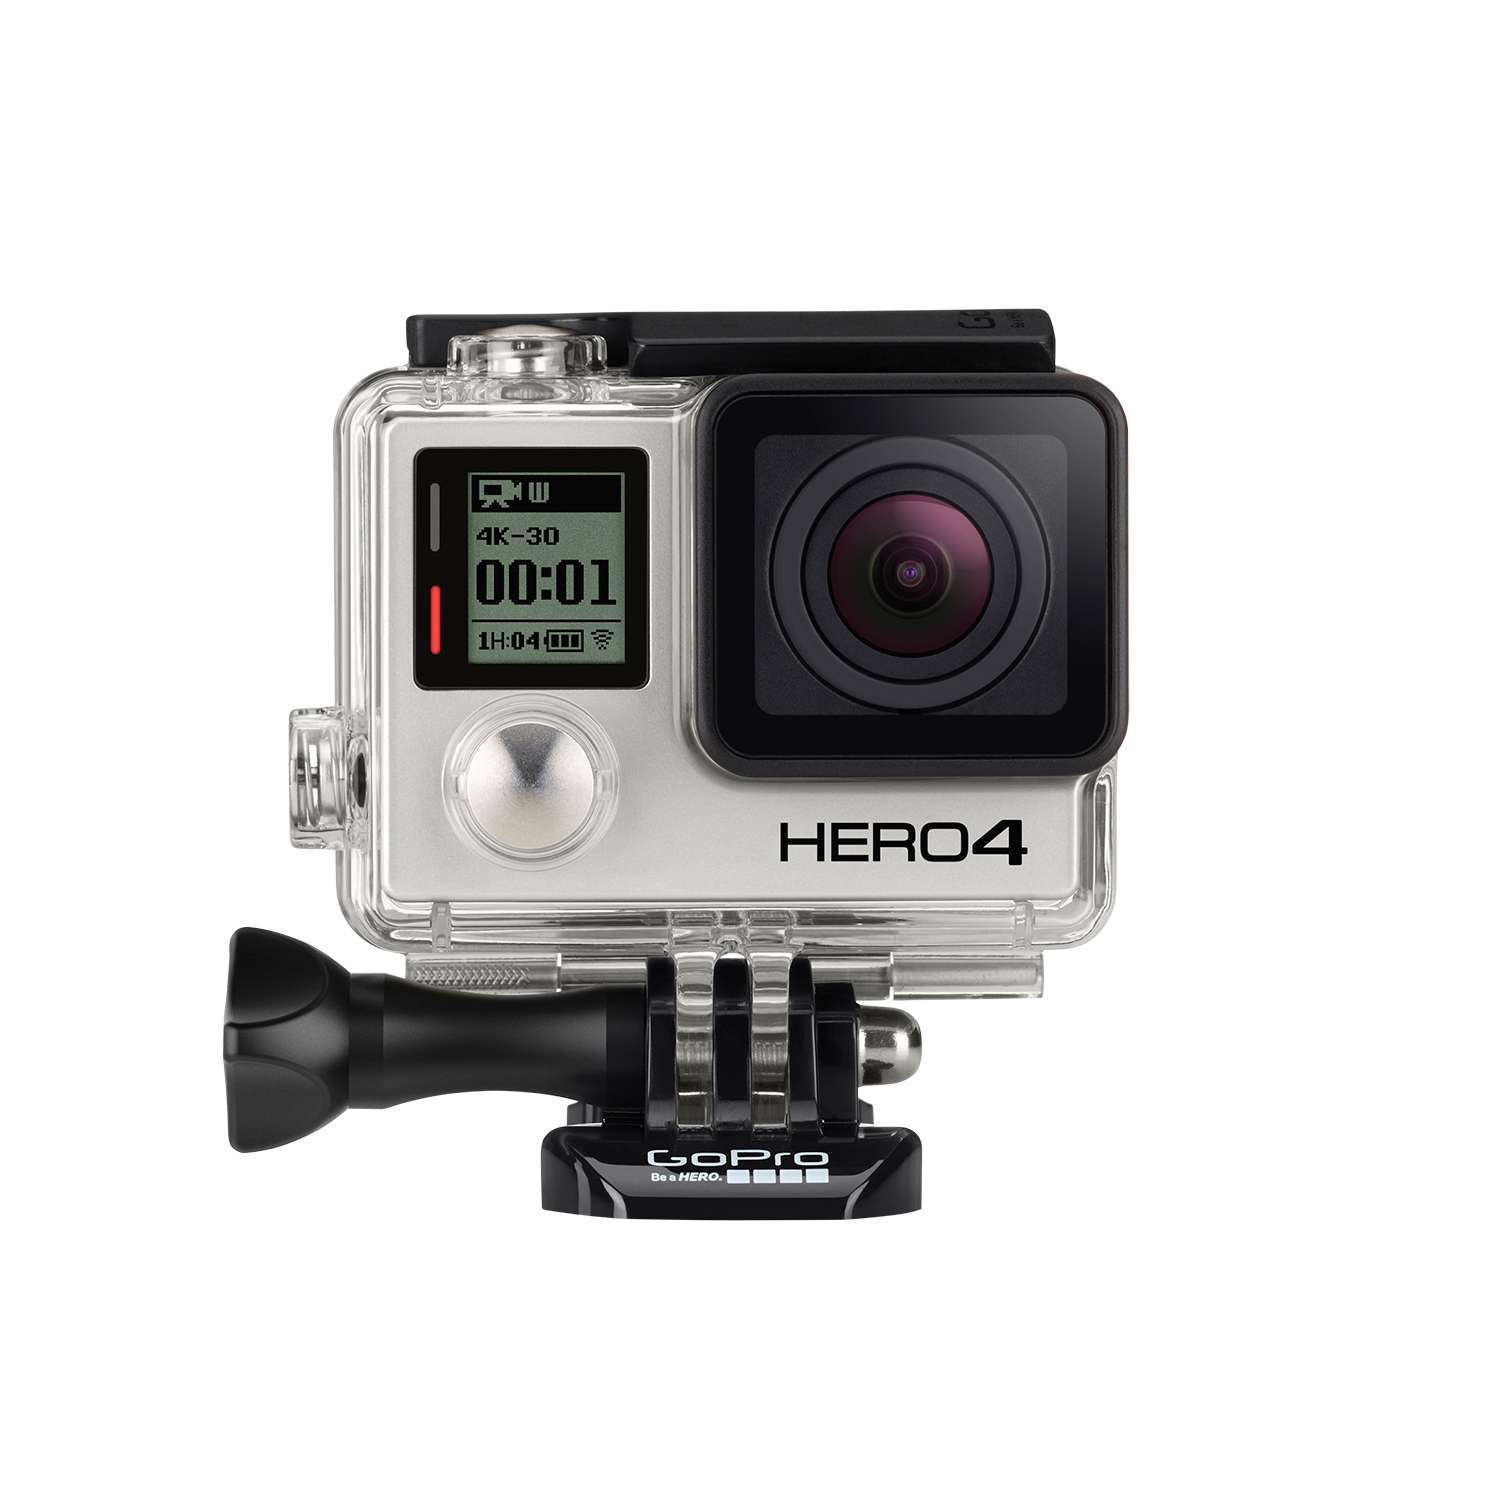 Again, if you haven't used a GoPro, now's the time. The California-based company just released its newest high-definition camera and it's better than ever. The Hero4+ has higher resolution and faster frame rates to capture frame-by-frame moments even better than before.